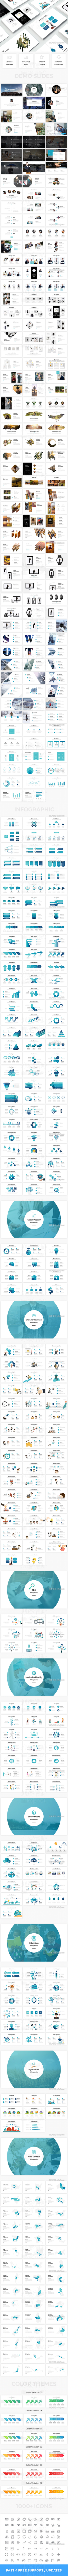 PPT模板 business multipurpose powerpoint template